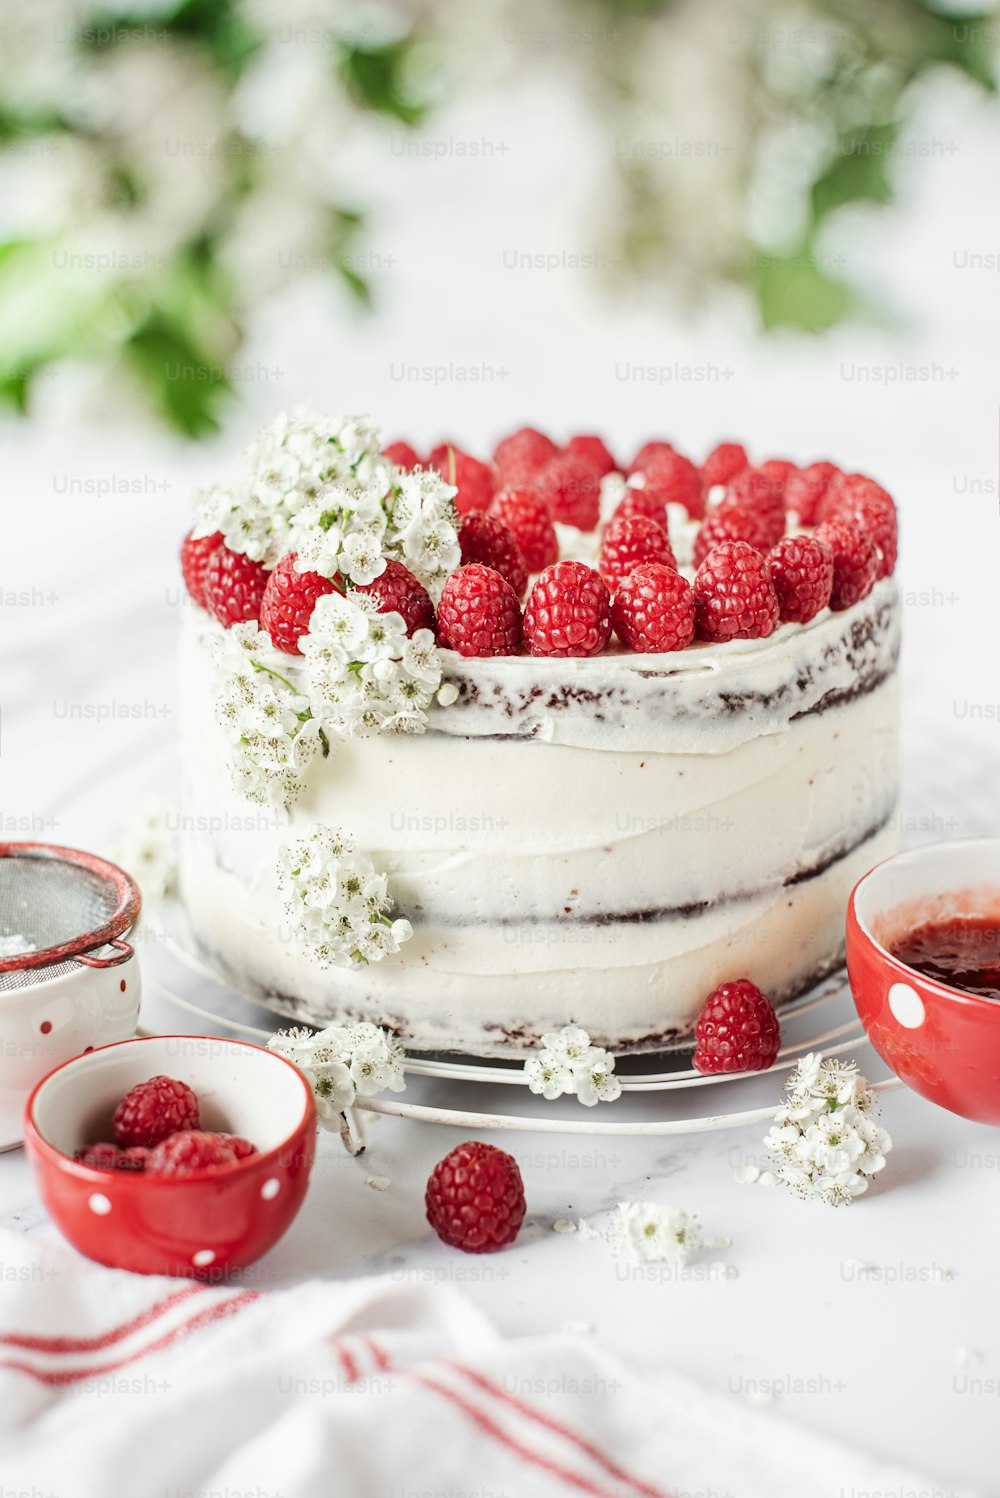 a cake with white frosting and raspberries on top